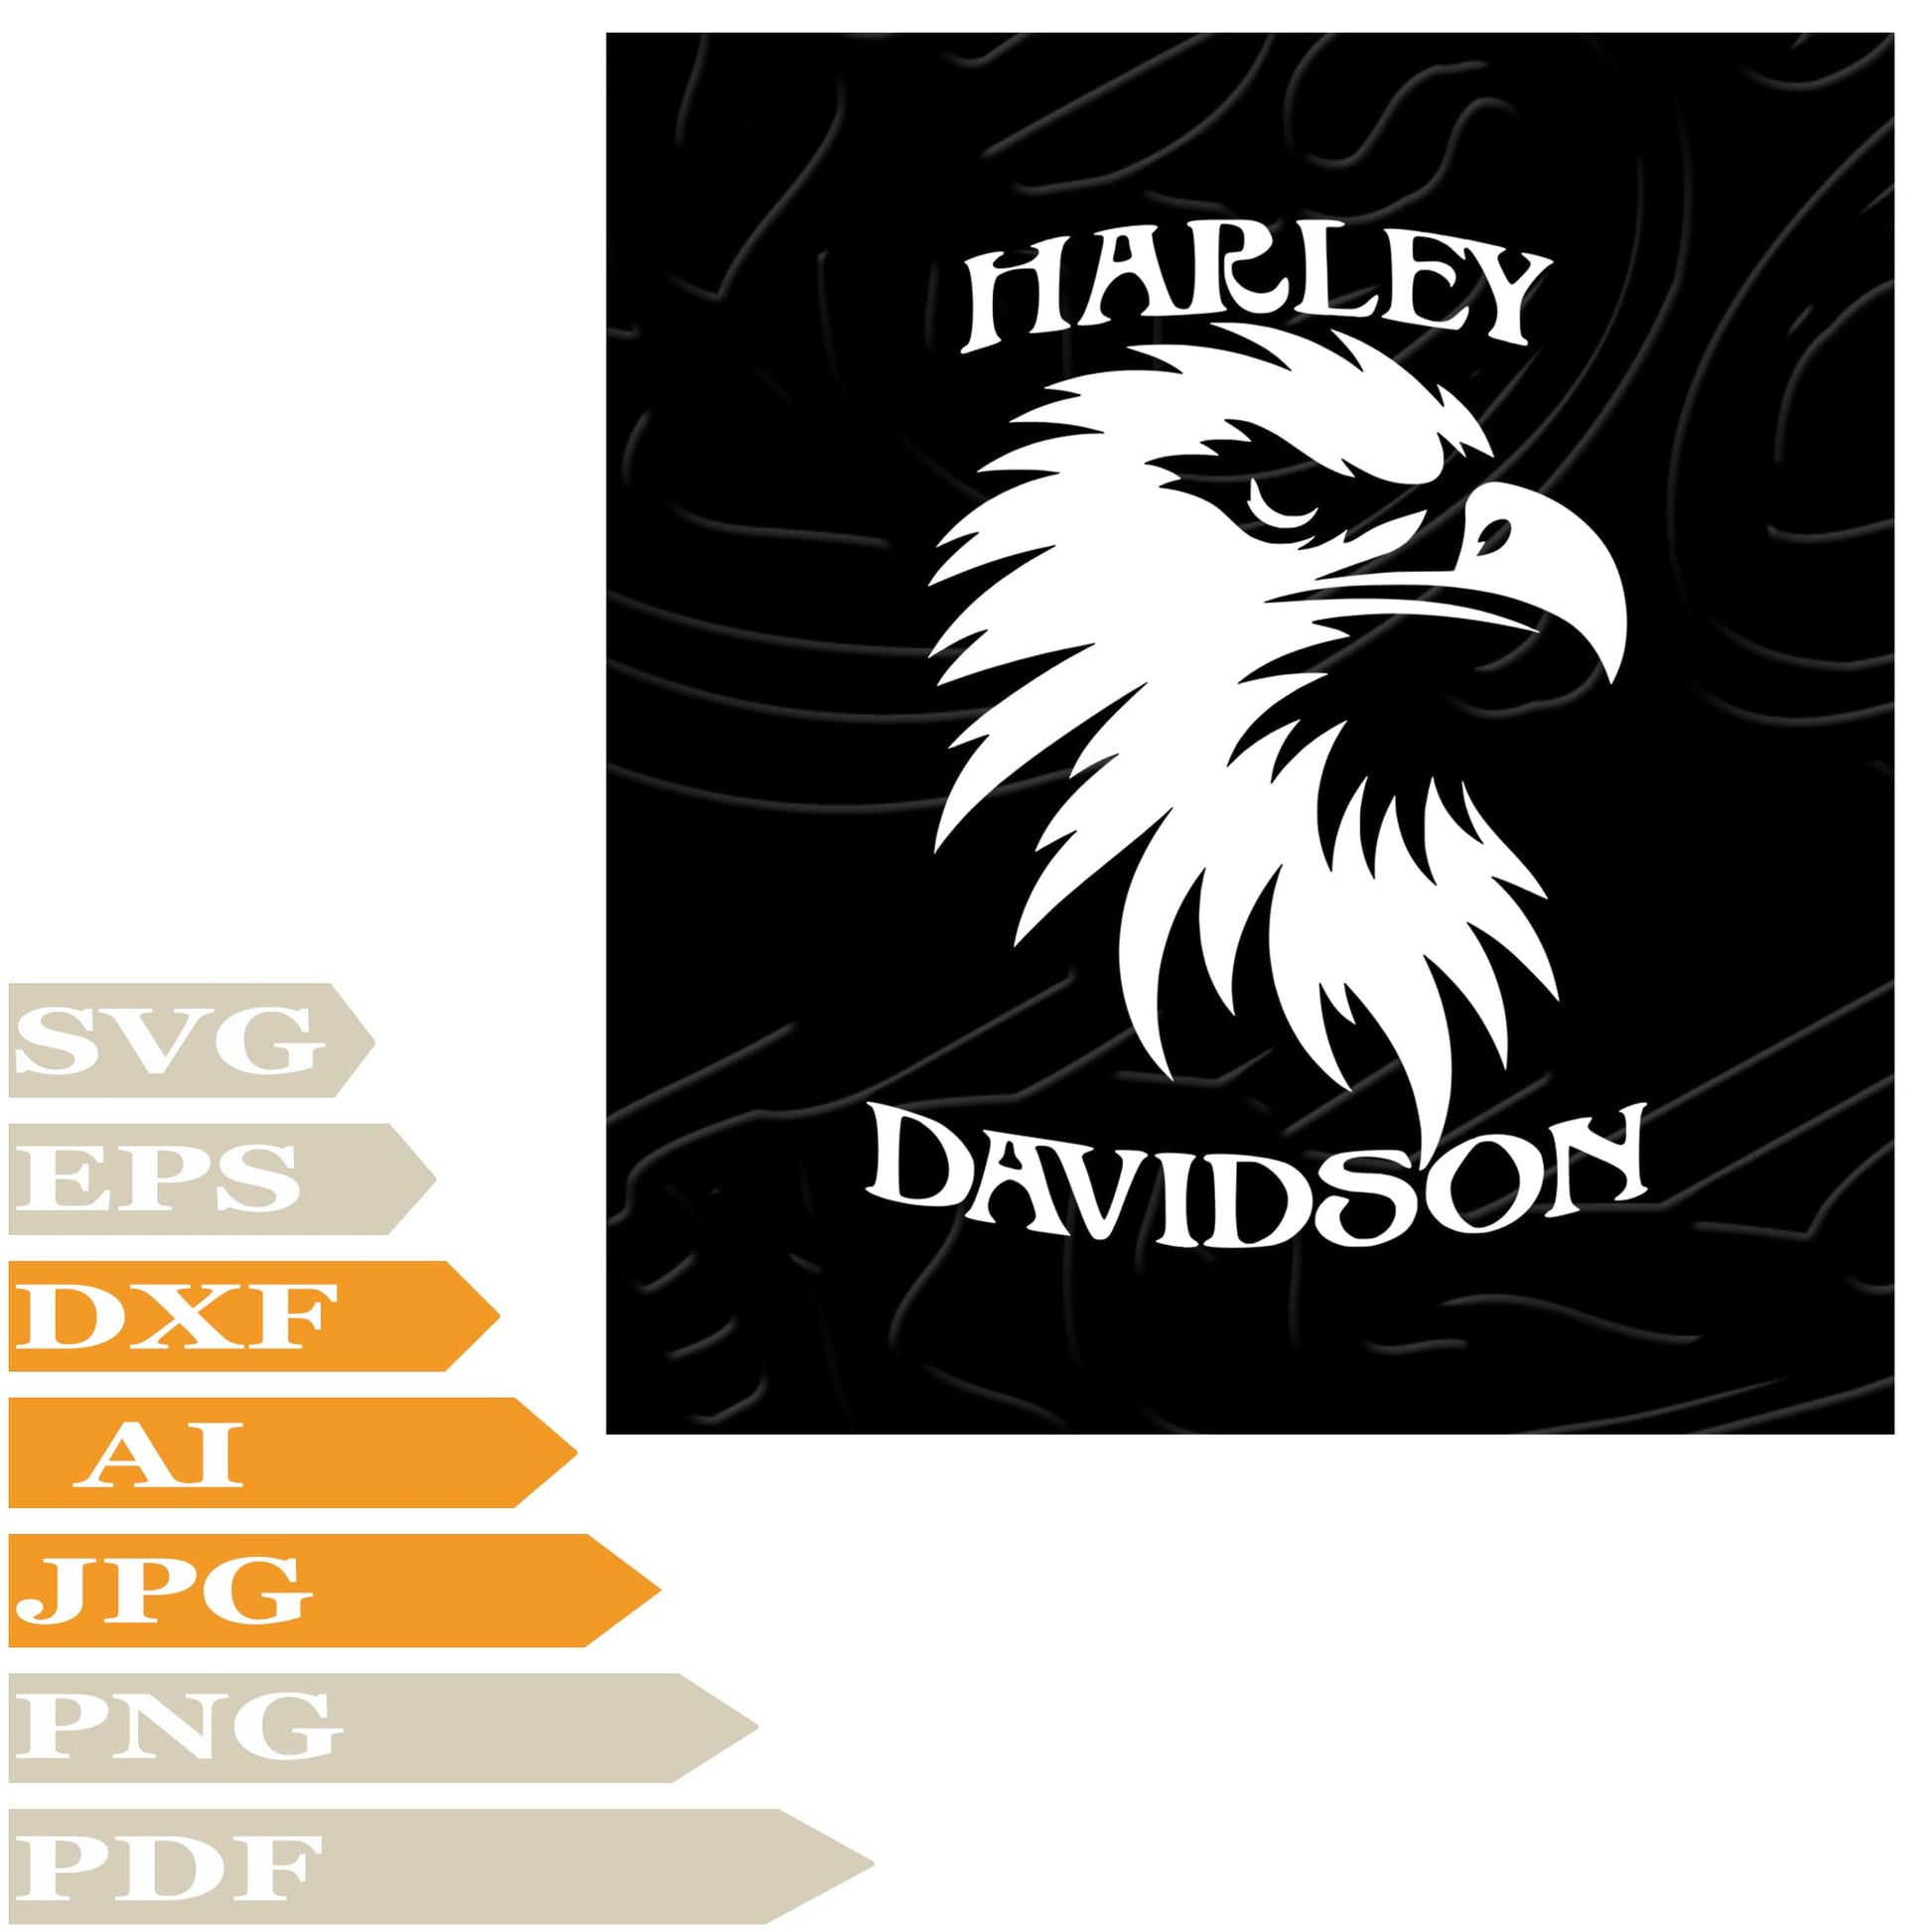 Eagle SVG, Eagle Harley Davidson Logo SVG Design, Harley Davidson Vector Graphics, Eagle Harley Davidson Logo For Cricut, For Tattoo, Clip Art, Cut File, T-Shirts, Silhouette, All Available